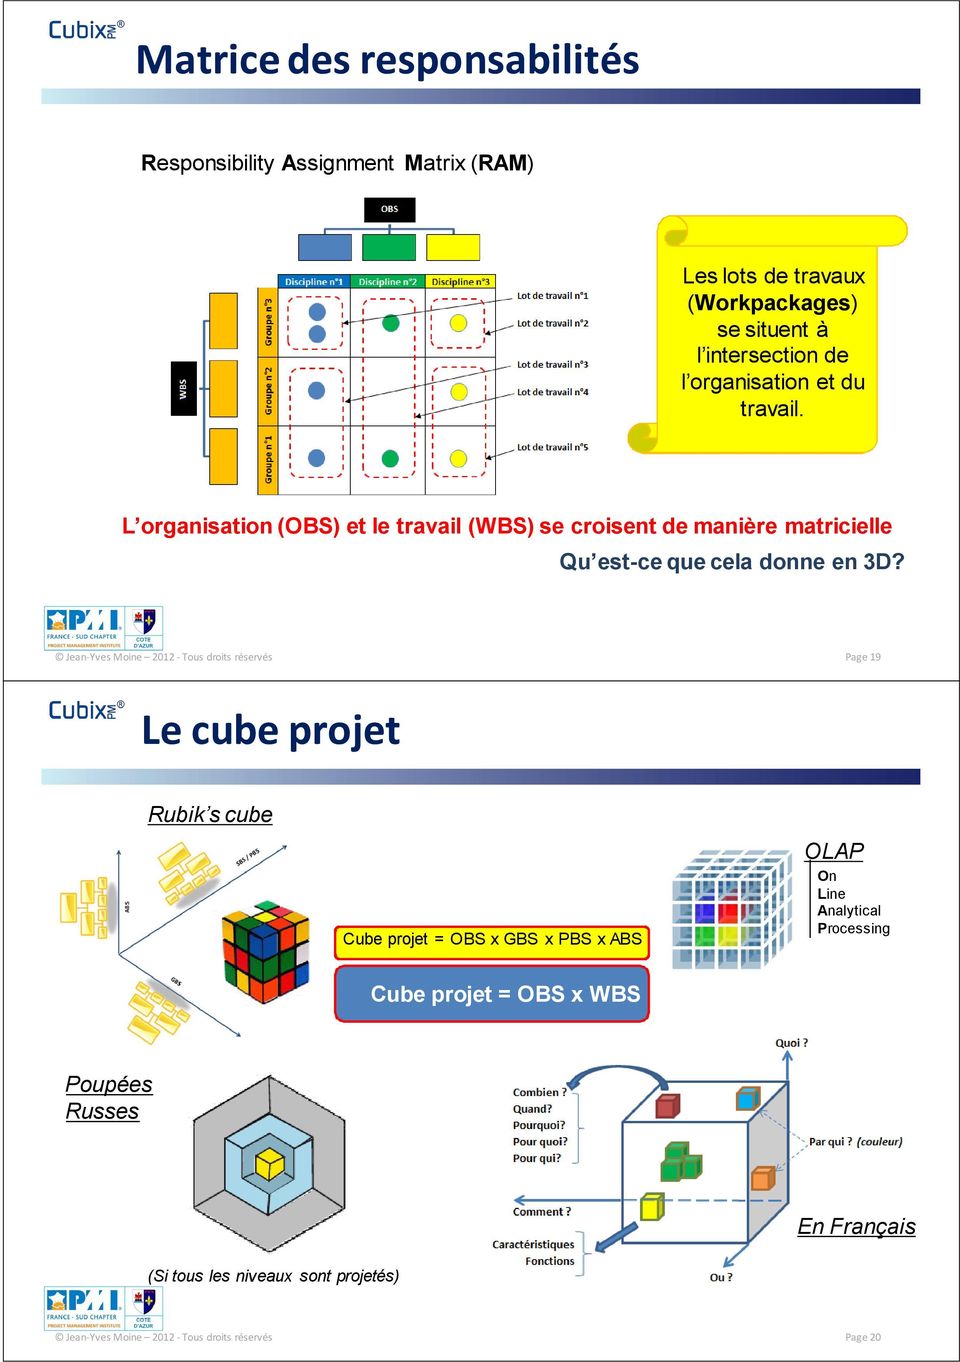 Jean-Yves Moine 2012 -Tous droits réservés Page 19 Le cube projet Rubik s cube Cube projet = OBS x GBS x PBS x ABS OLAP On Line Analytical